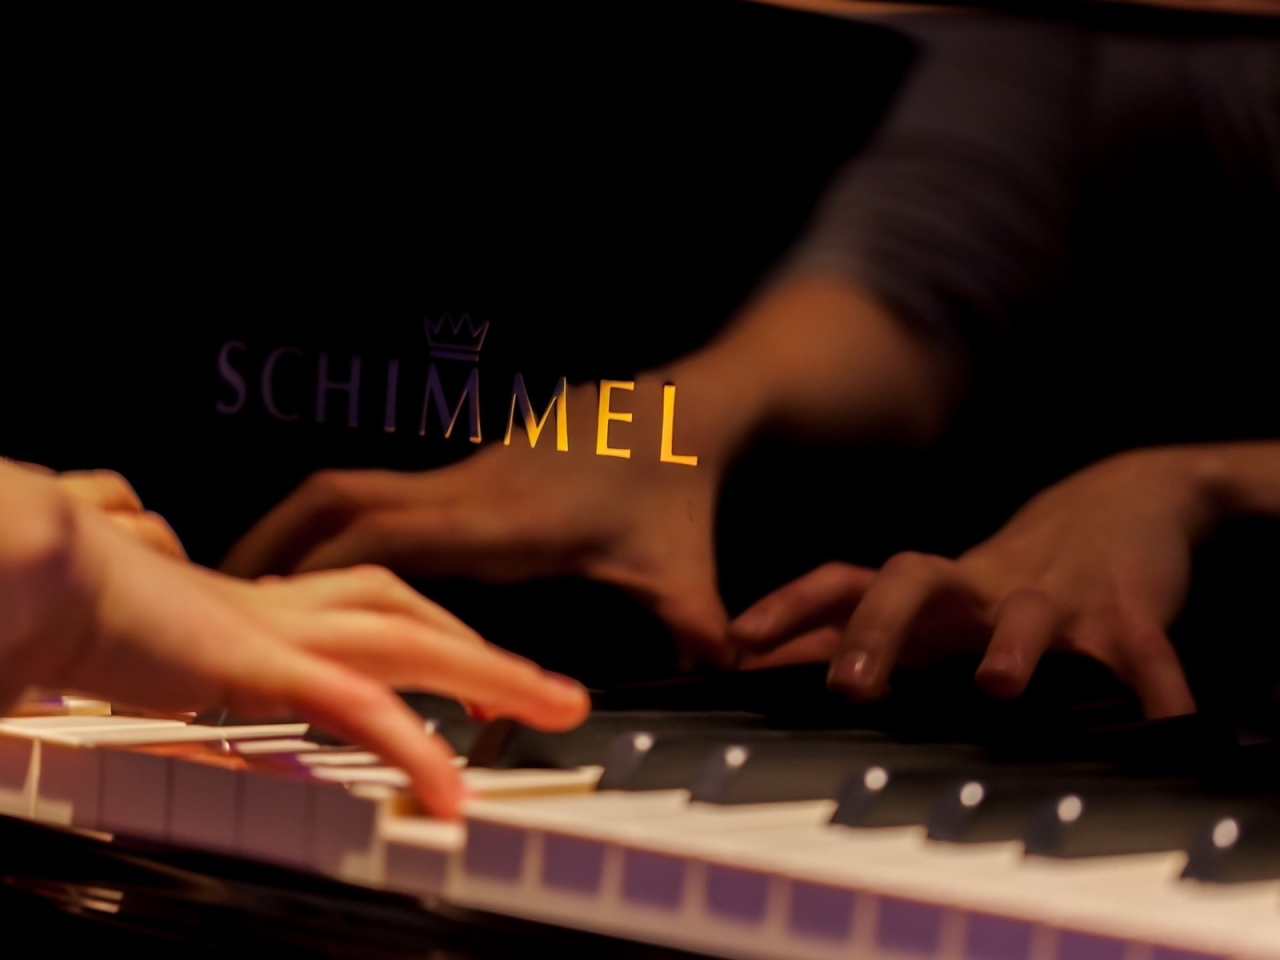 Schimmel Piano for 1280 x 960 resolution